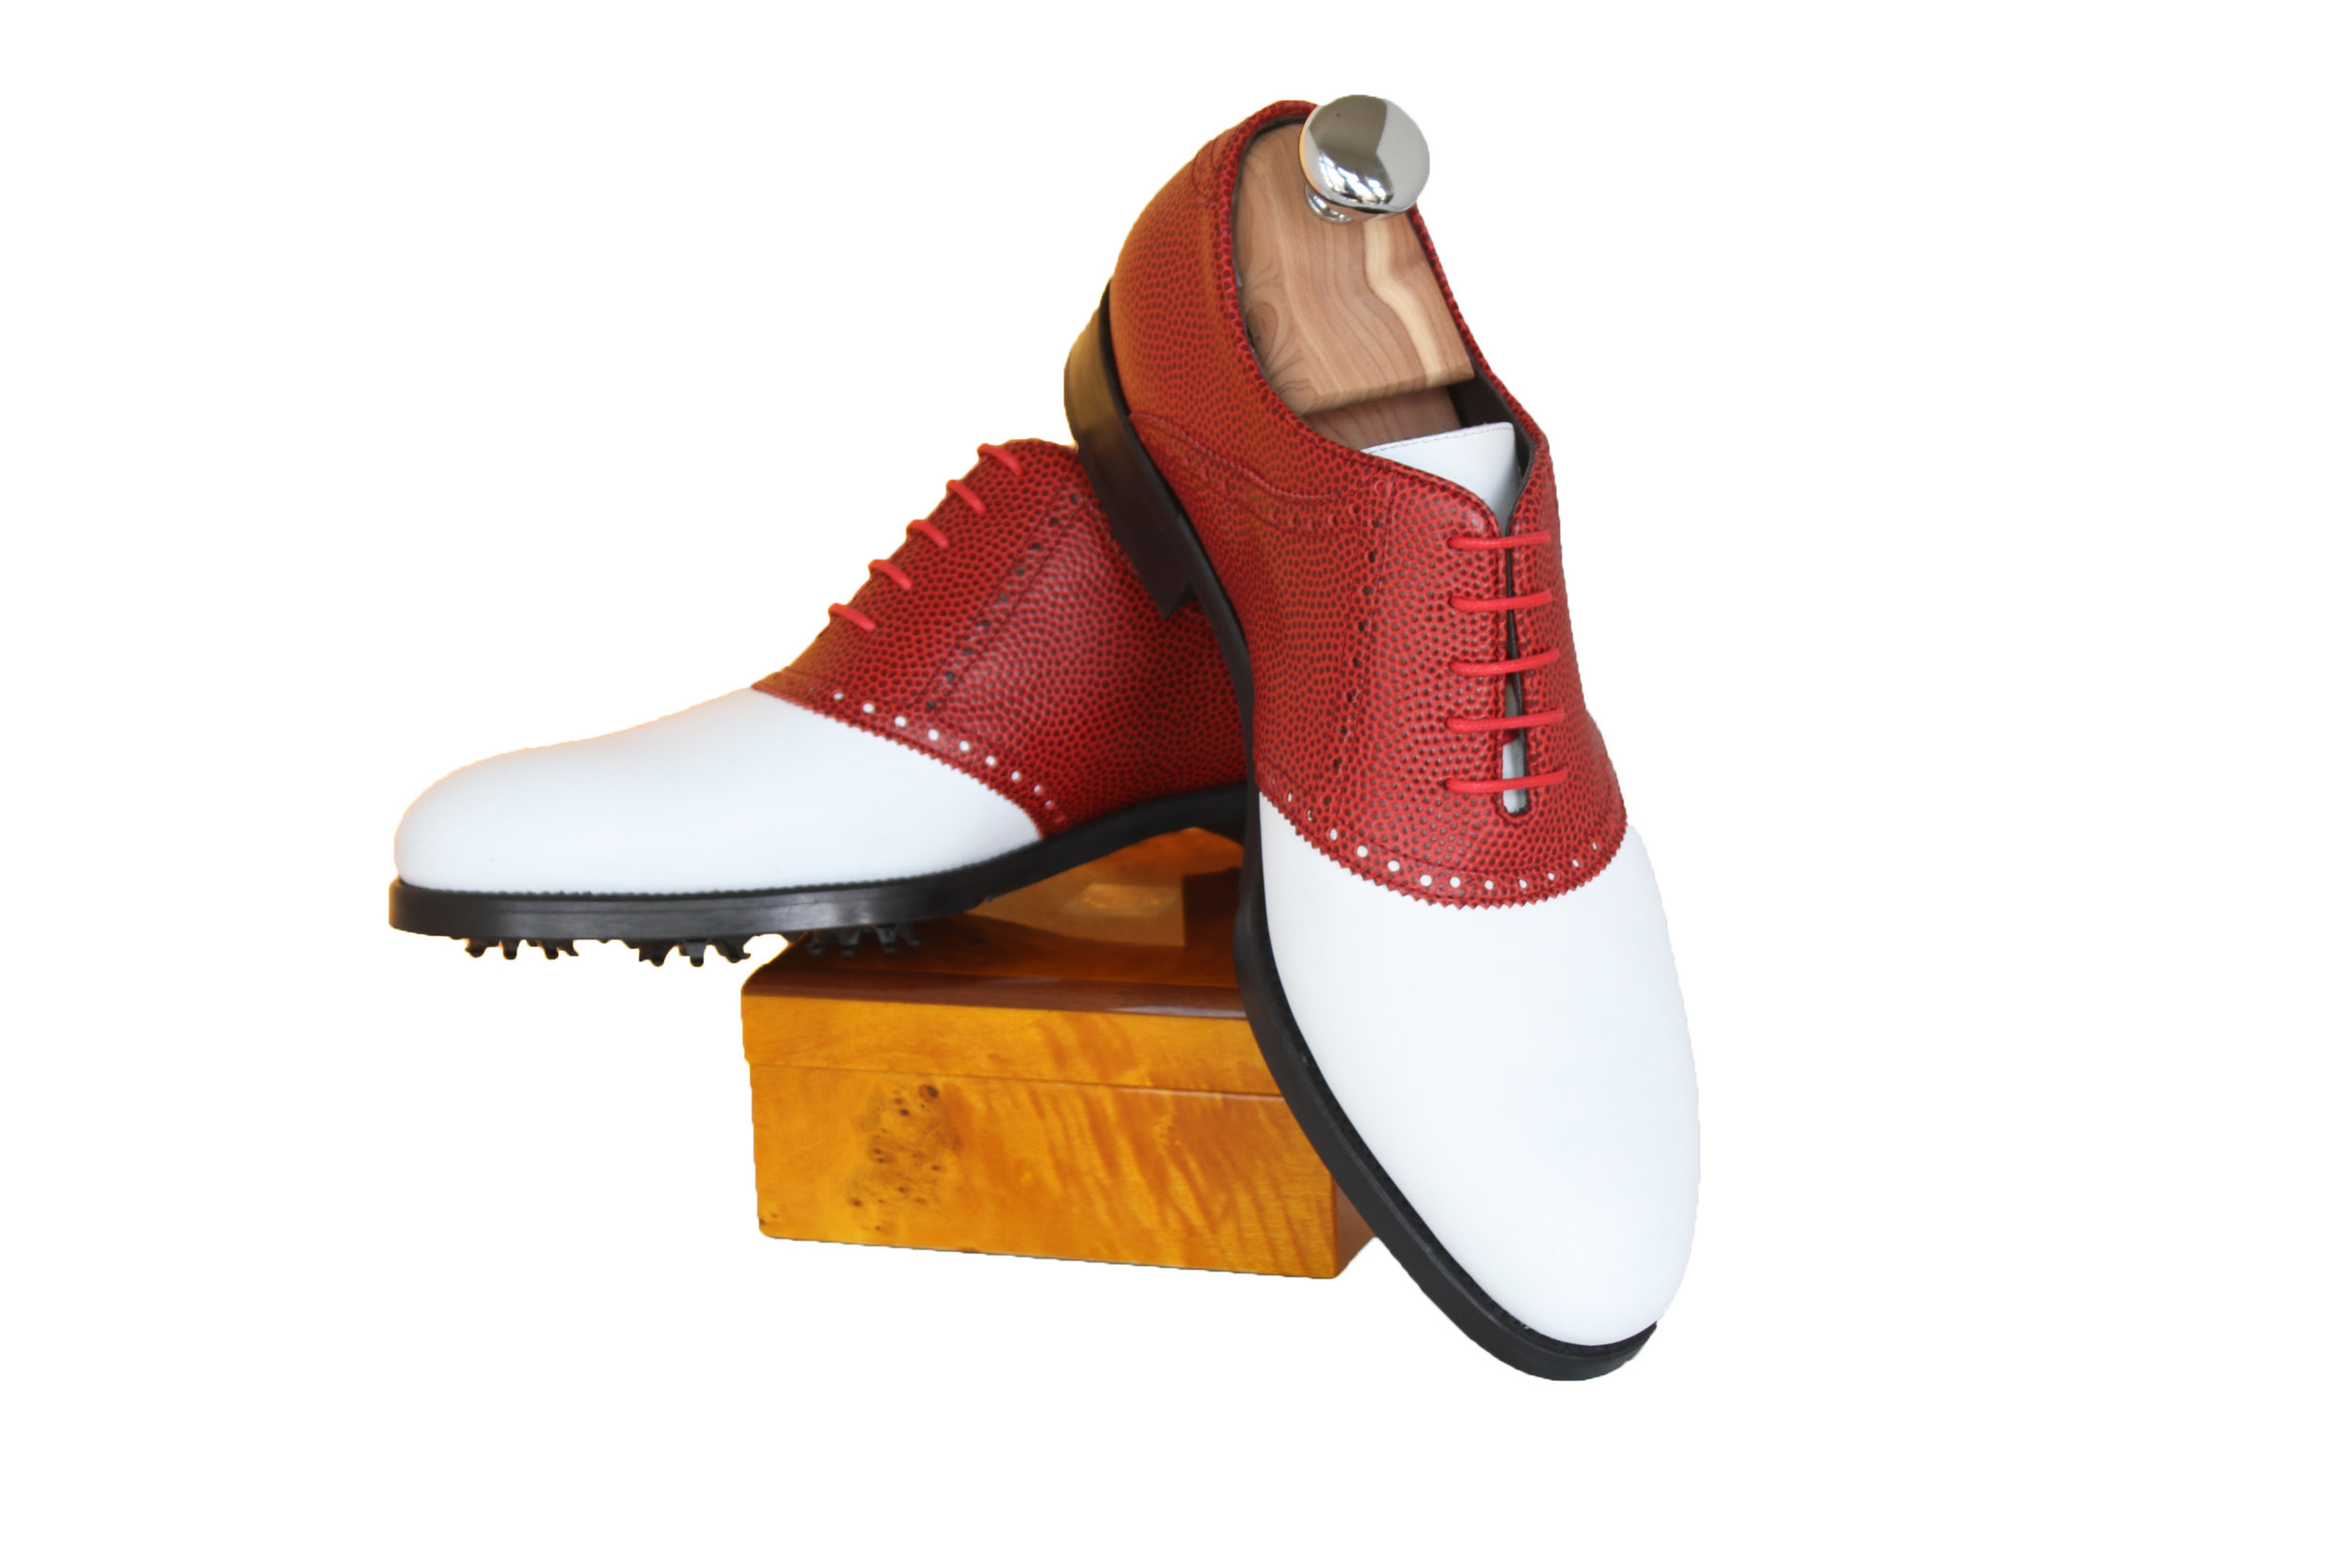 06 - RED AND WHITE GOLF SHOE.jpg